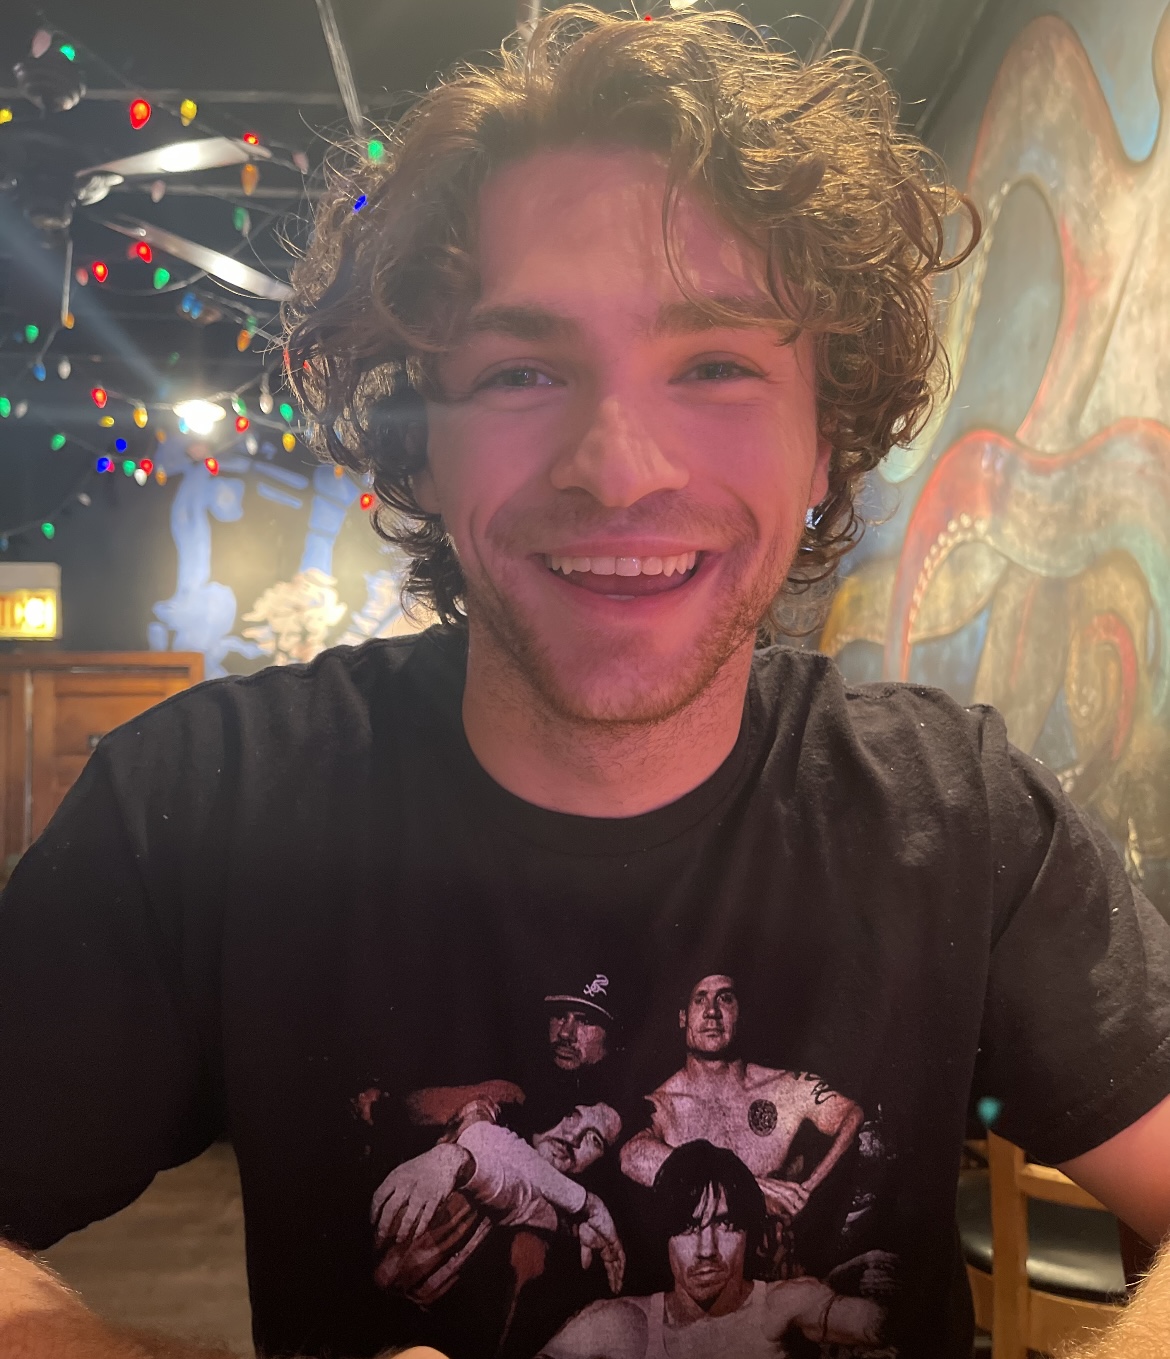 Spencer smiling at a table